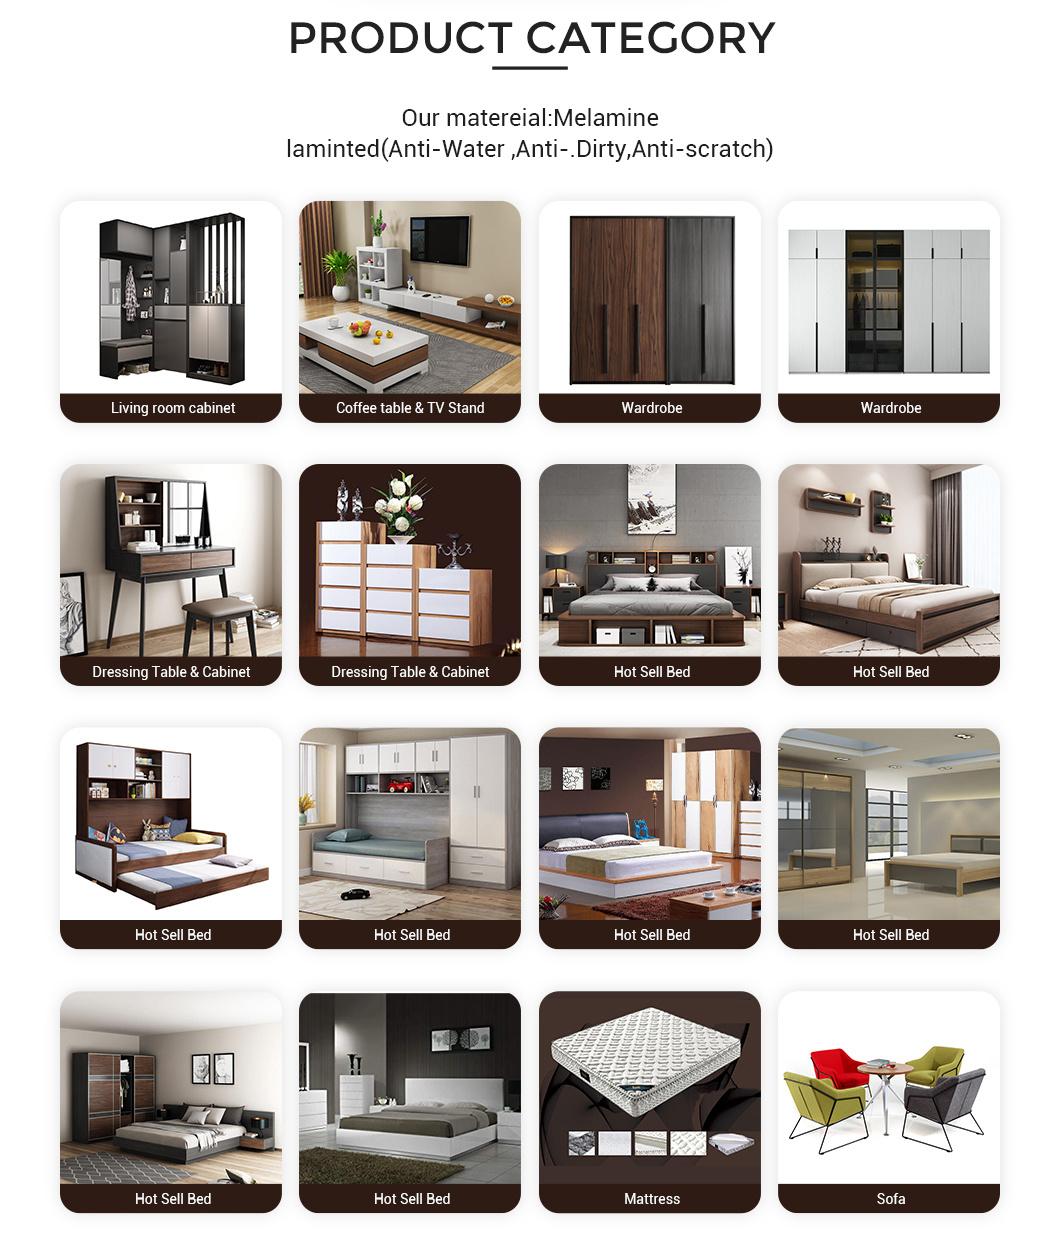 Cheap Price Modern Luxury Hotel Leather Customized Bedroom Furniture Set